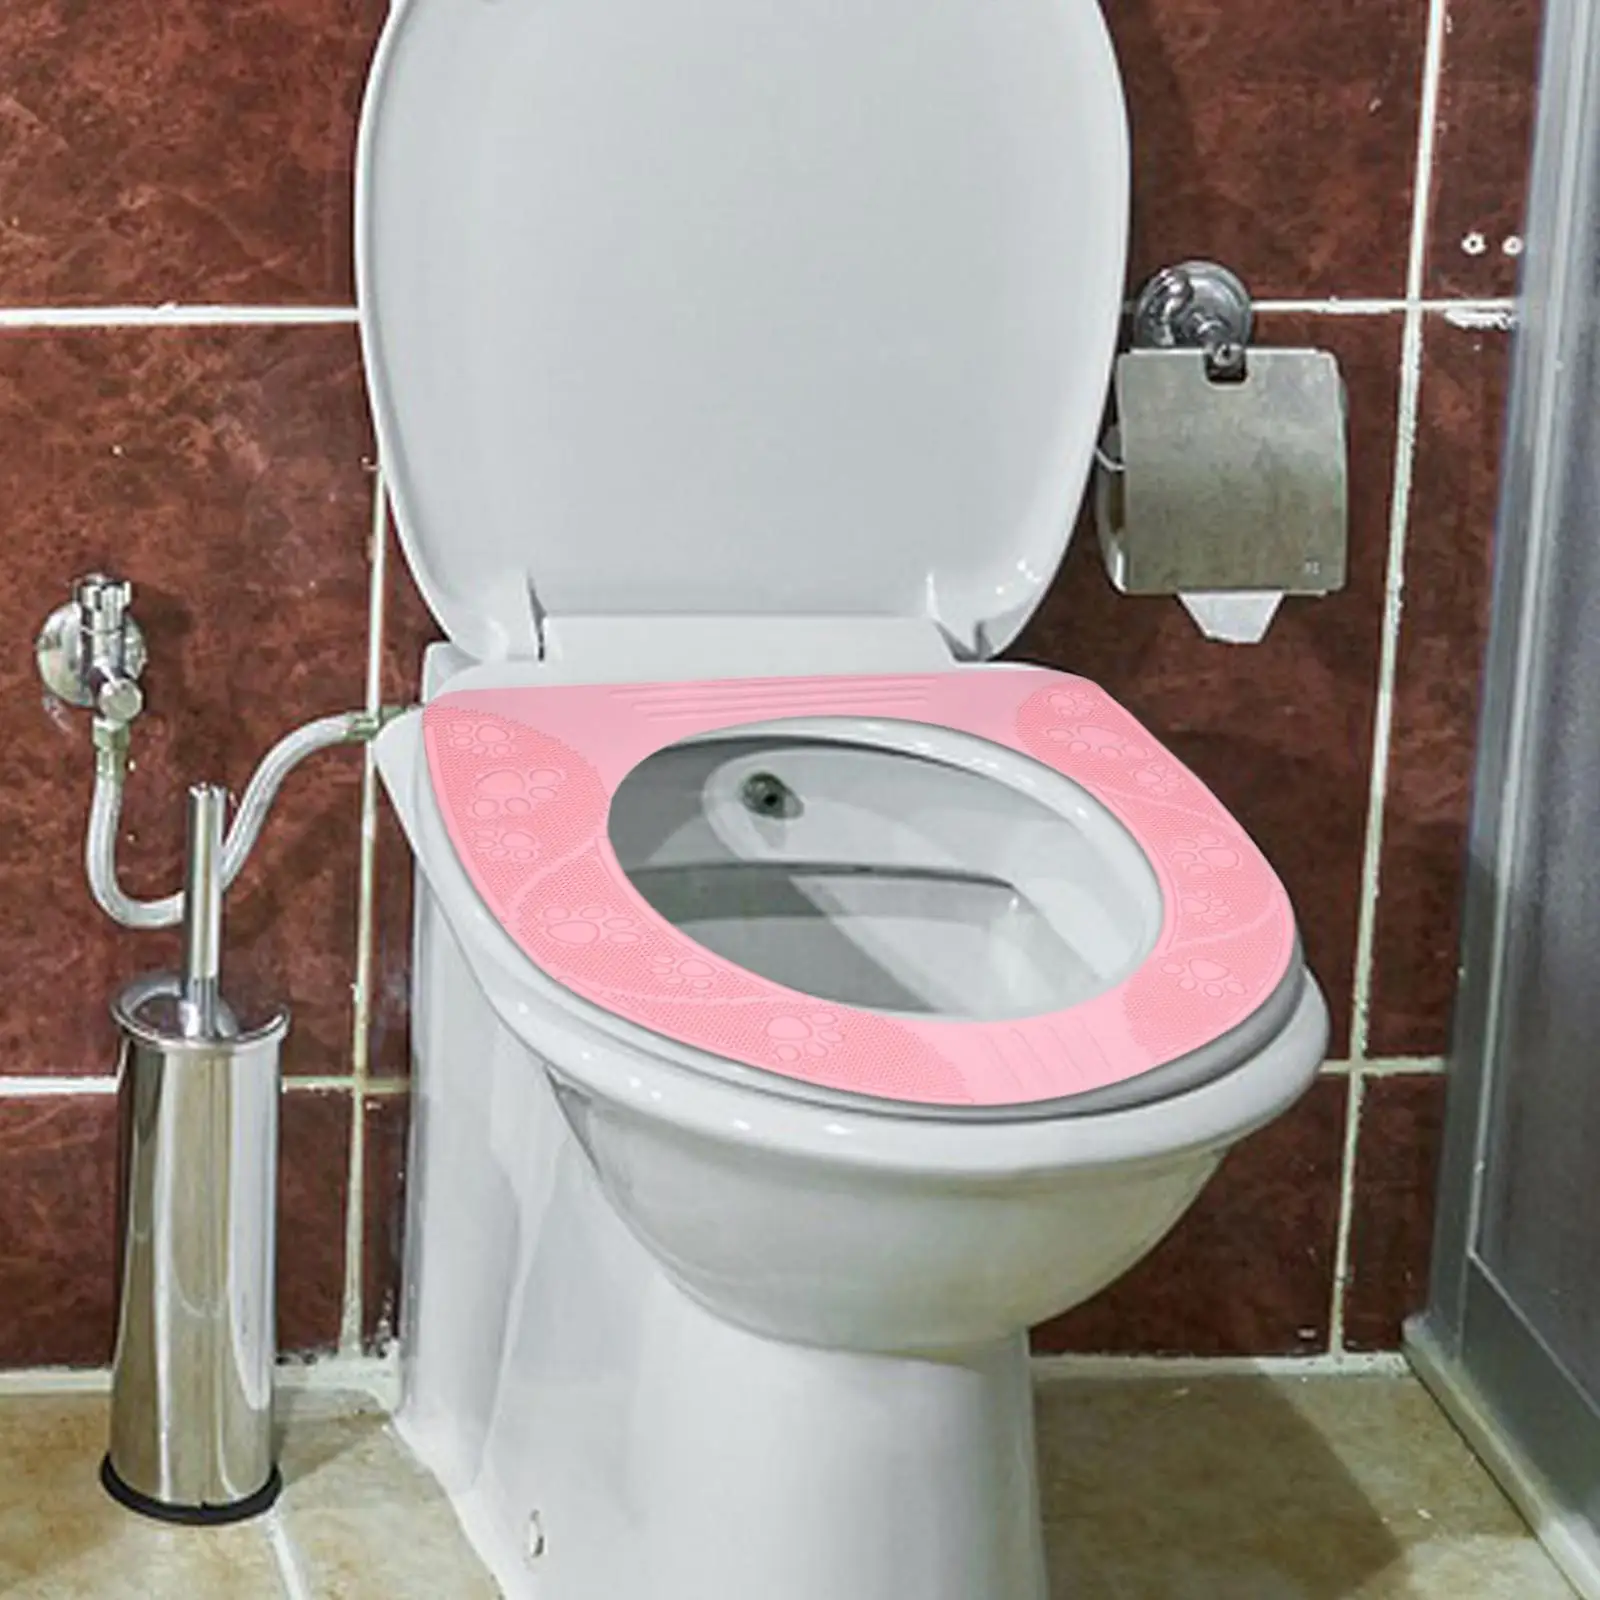 Toilet Seat Cover Universal Waterproof Suction Silicone for Household Home